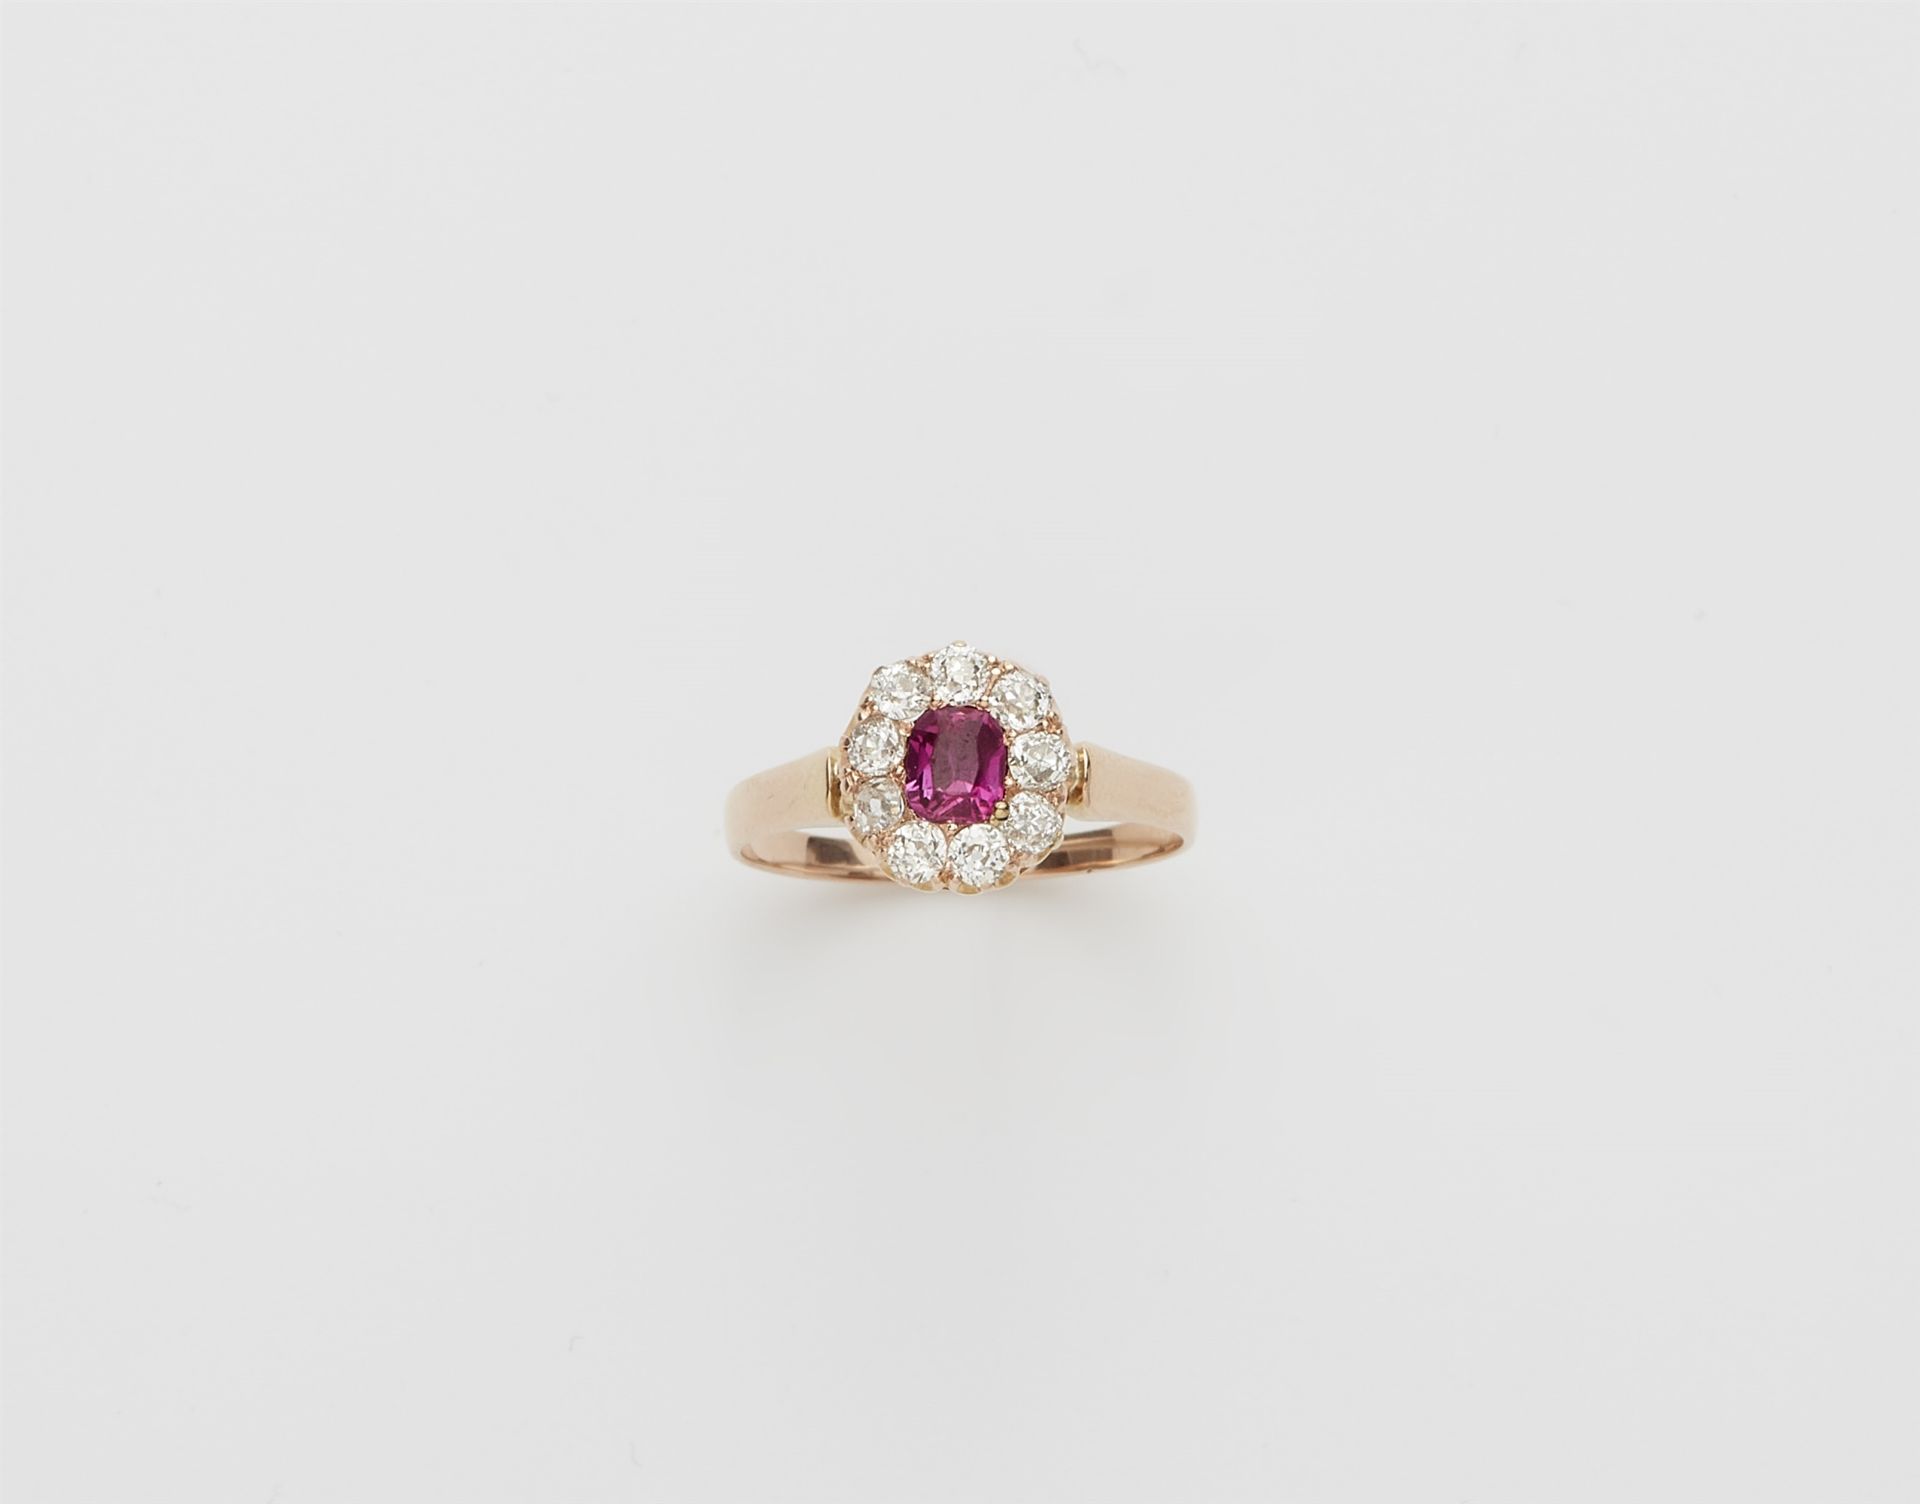 A 14k rose gold diamond and pink Burmese ruby cluster ring.